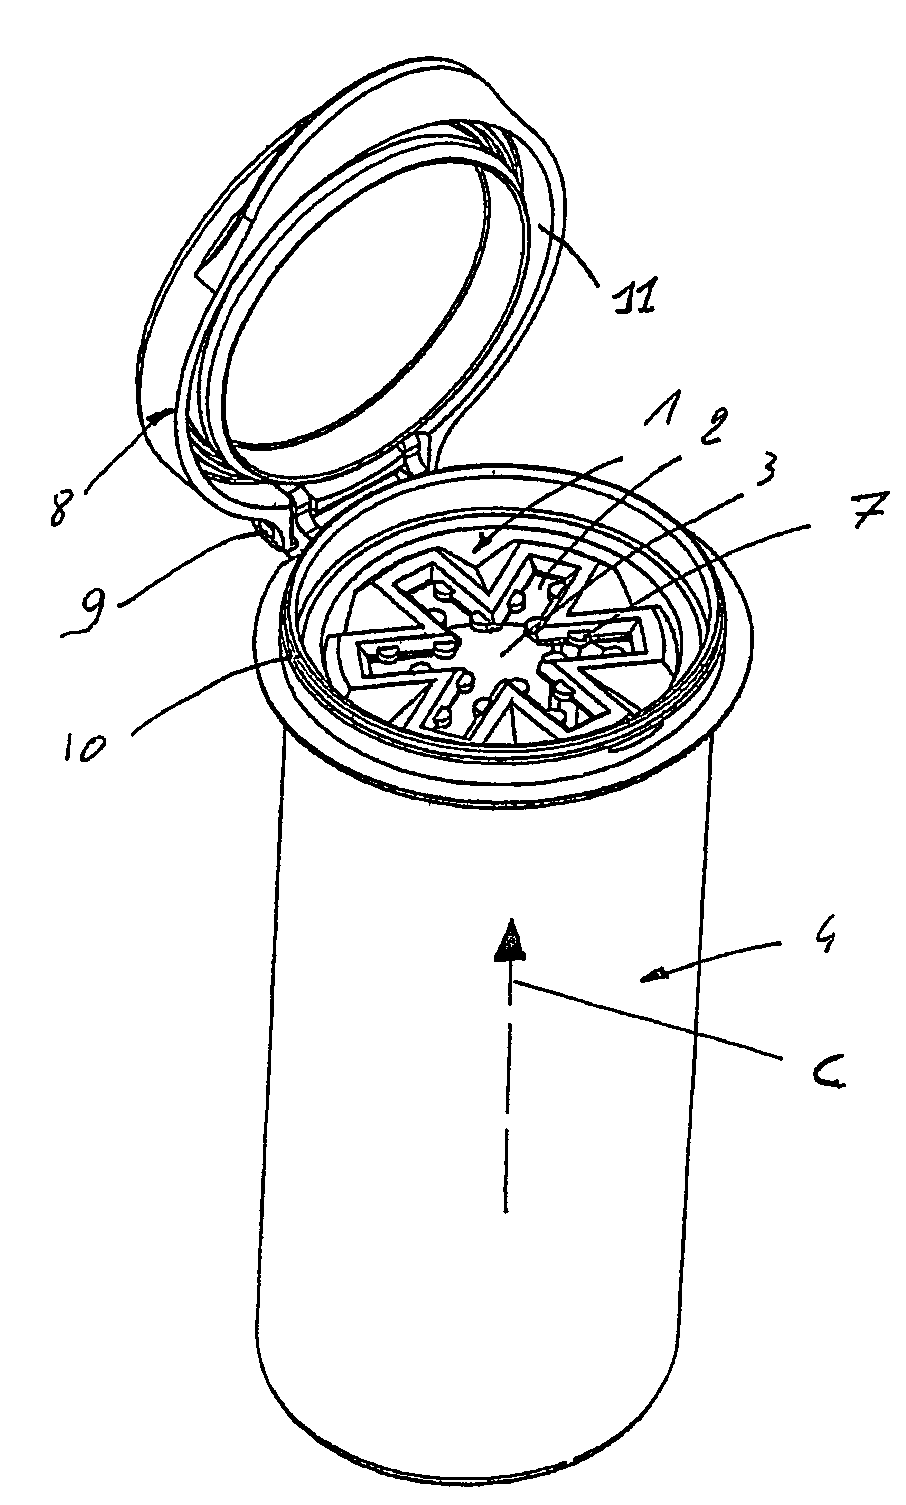 Device for dispensing oblong objects, comprising one main opening and at least one other elongated opening